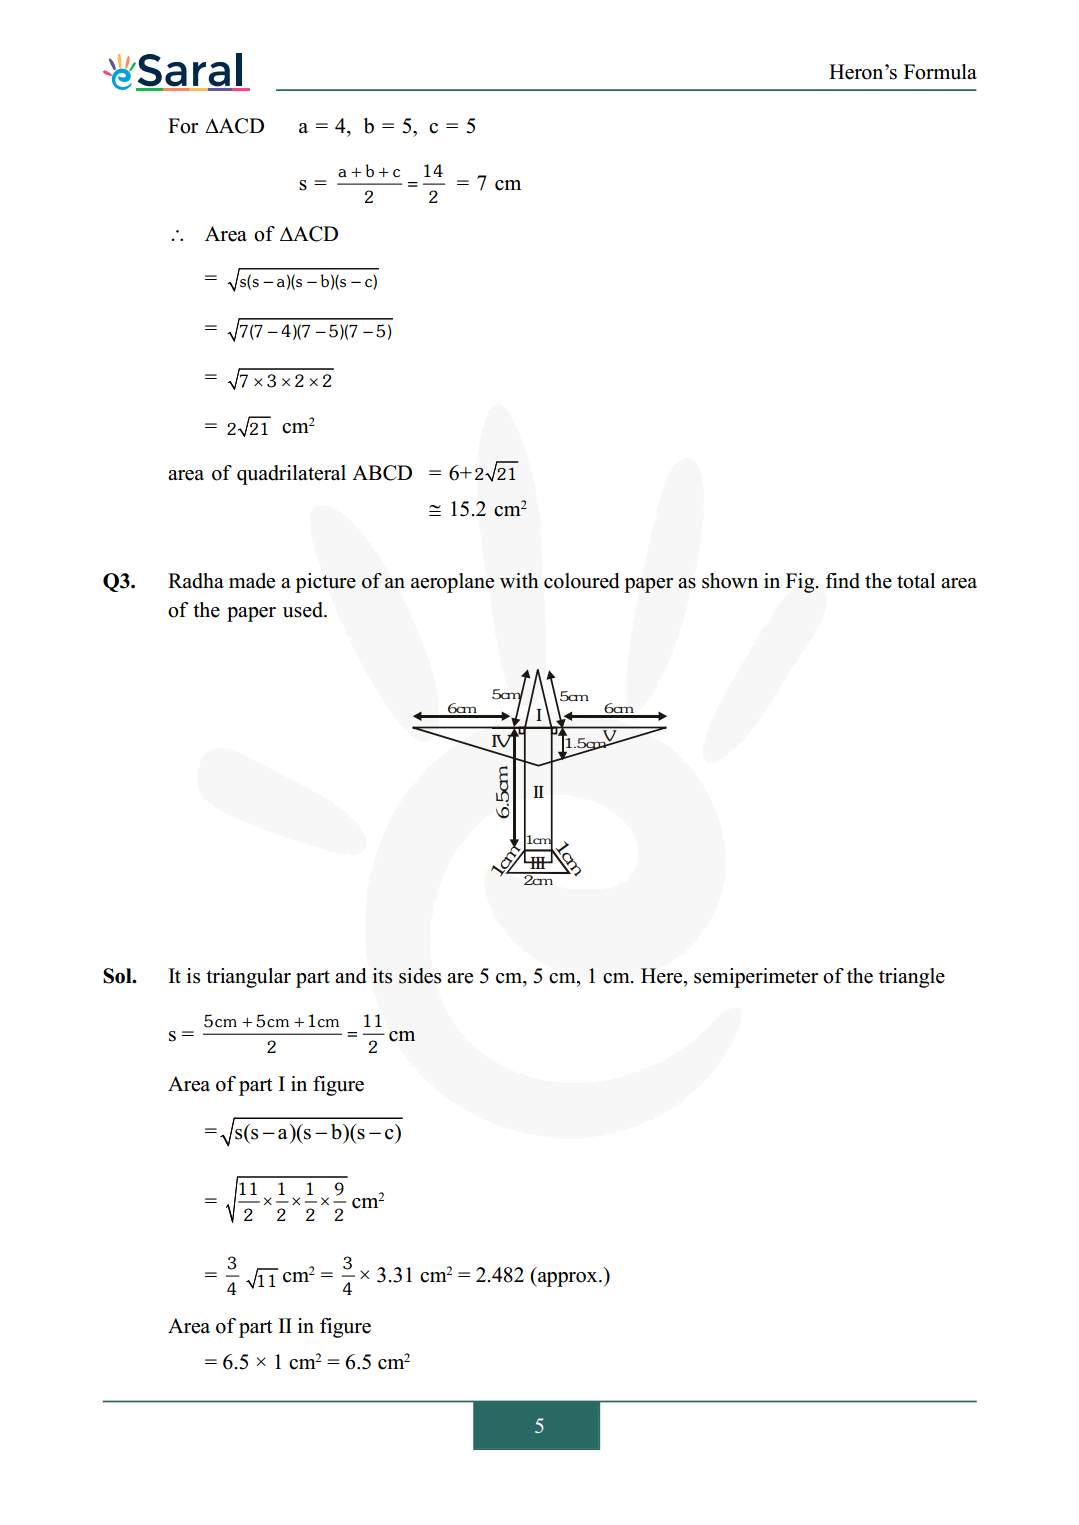 Class 9 maths chapter 12 exercise 12.2 solutions Image 2